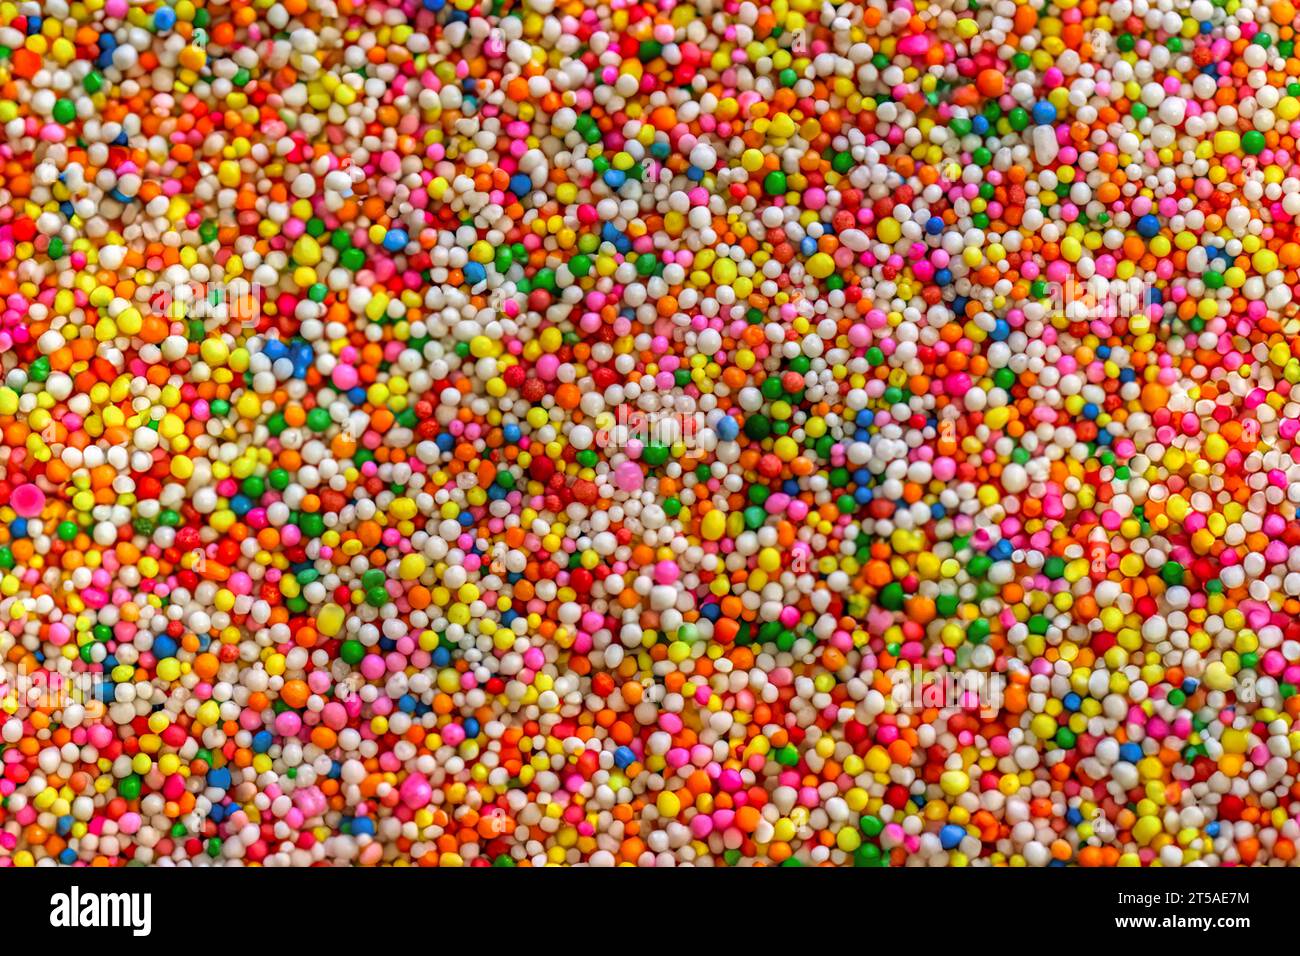 confectionery ingredients rainbow sprinkles, texture sprinkle of multicolor rainbow candy for various toppings Stock Photo